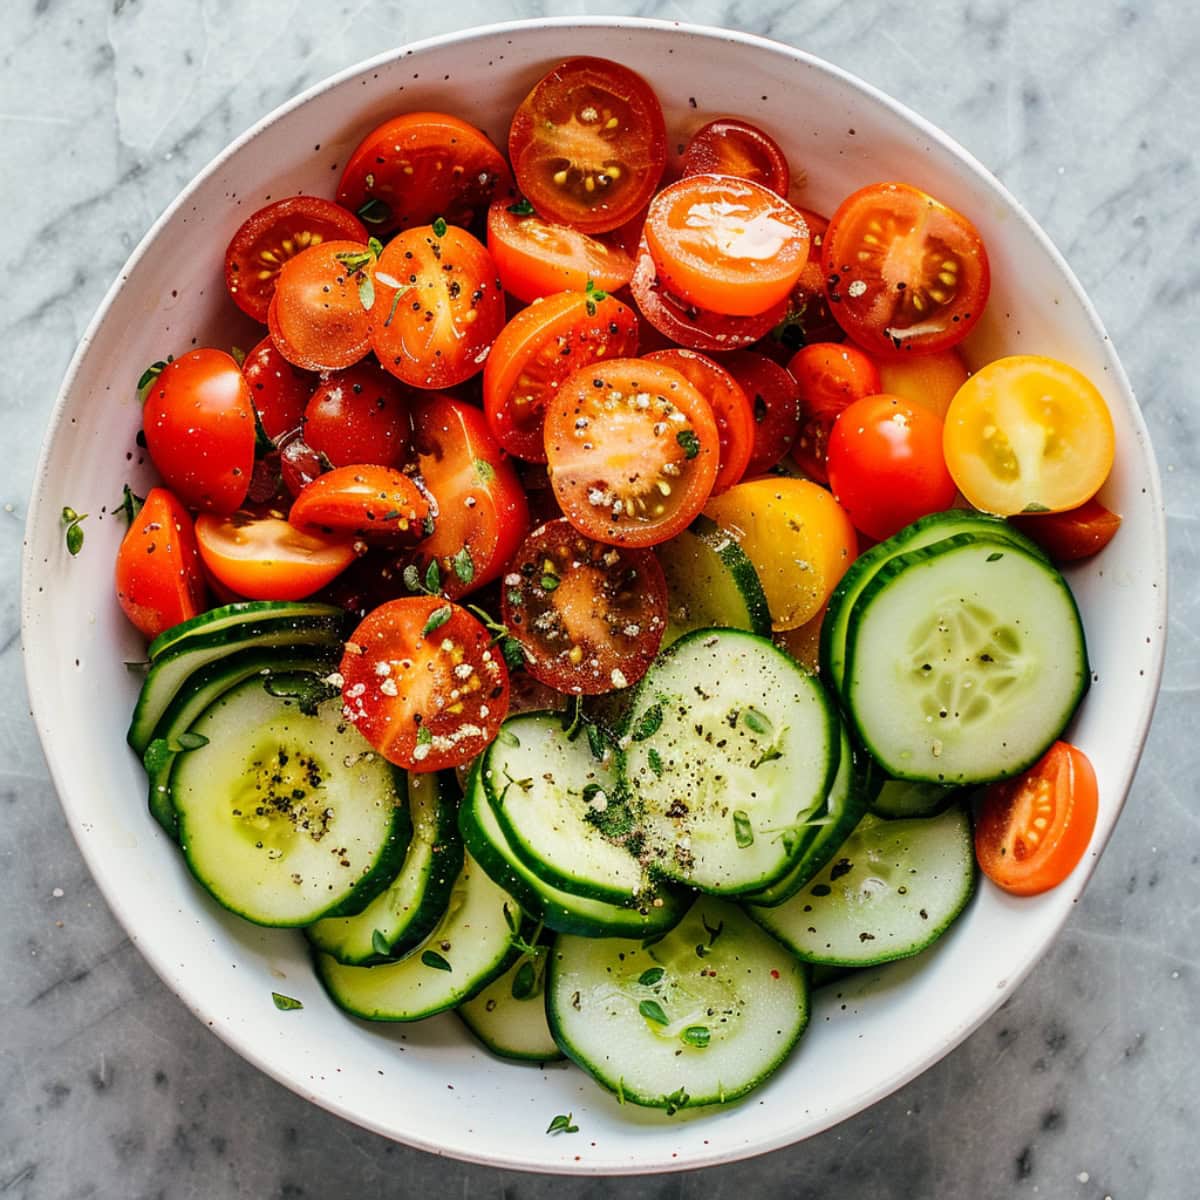 A bowl of sliced cucumbers and tomatoes in a marble countertop.